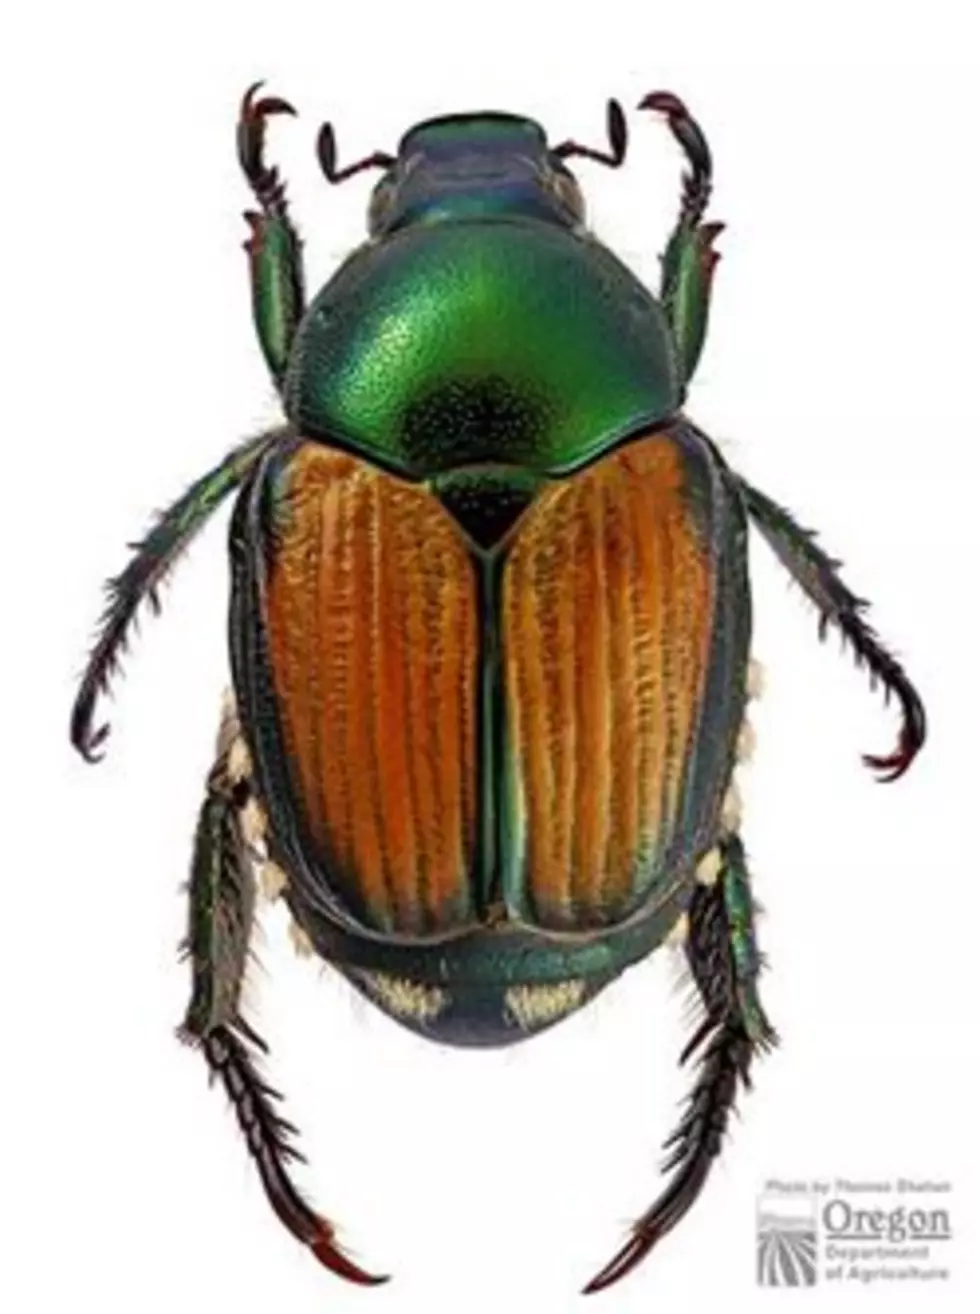 So it Begins: WA Ag Officials Catch Summer&#8217;s First Pair of Japanese Beetles in Grandview